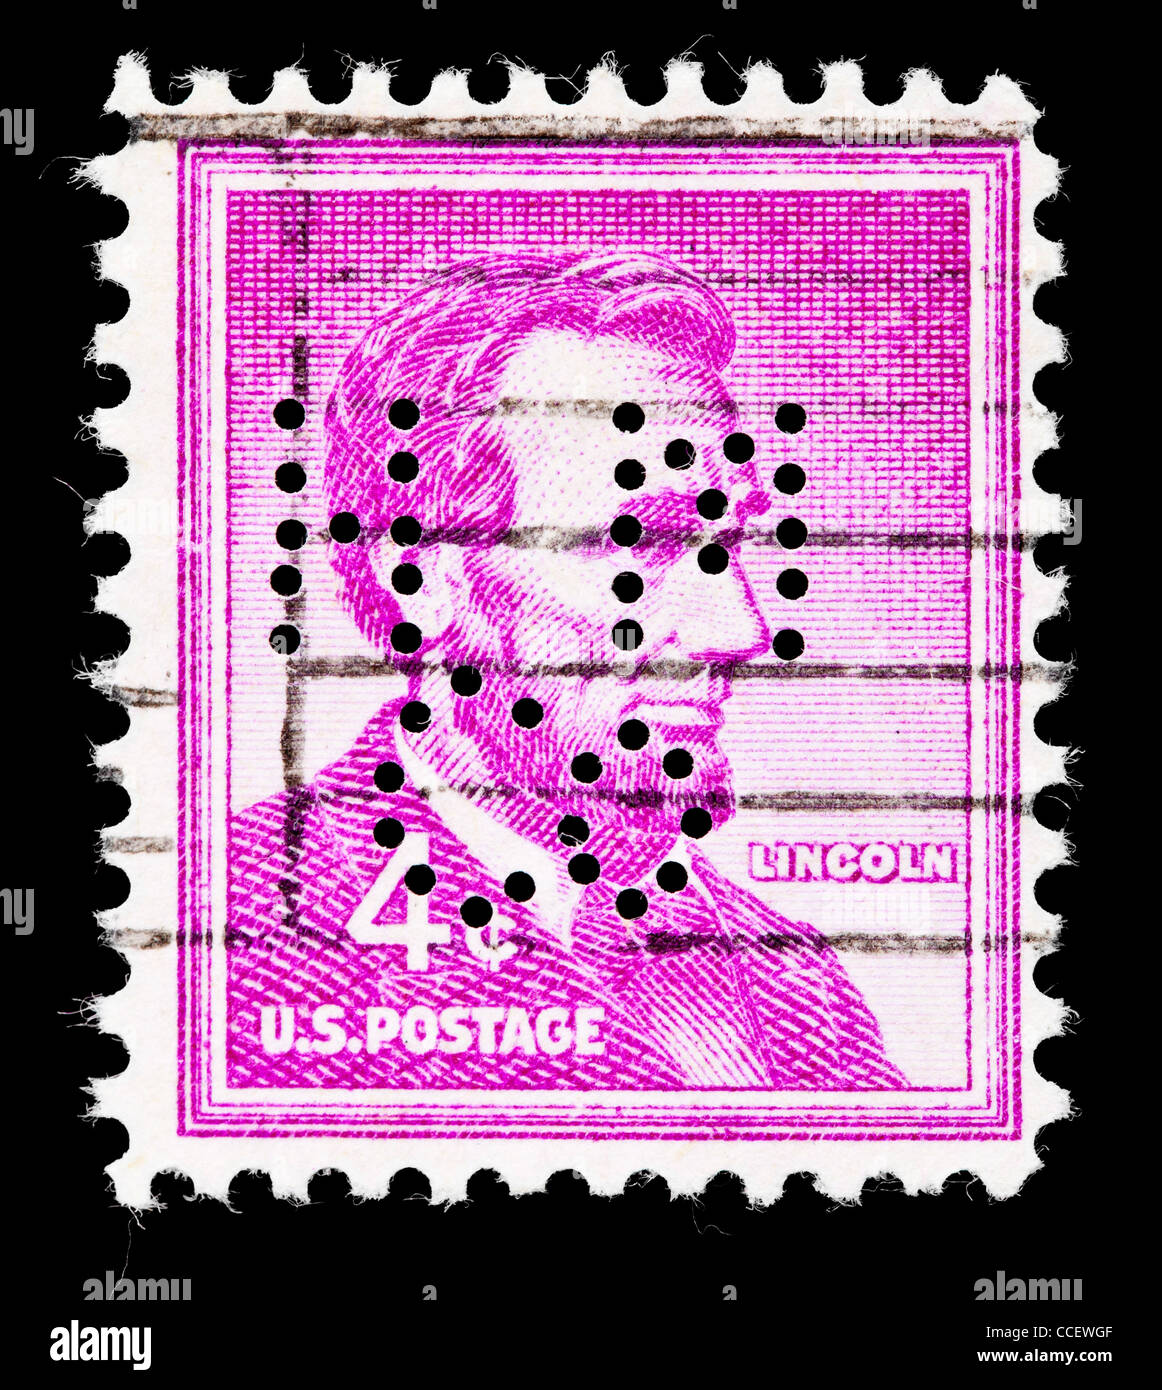 Postage stamp: United States Postage, Abraham Lincoln, 4 cent, 1954, stamped, perforated Stock Photo